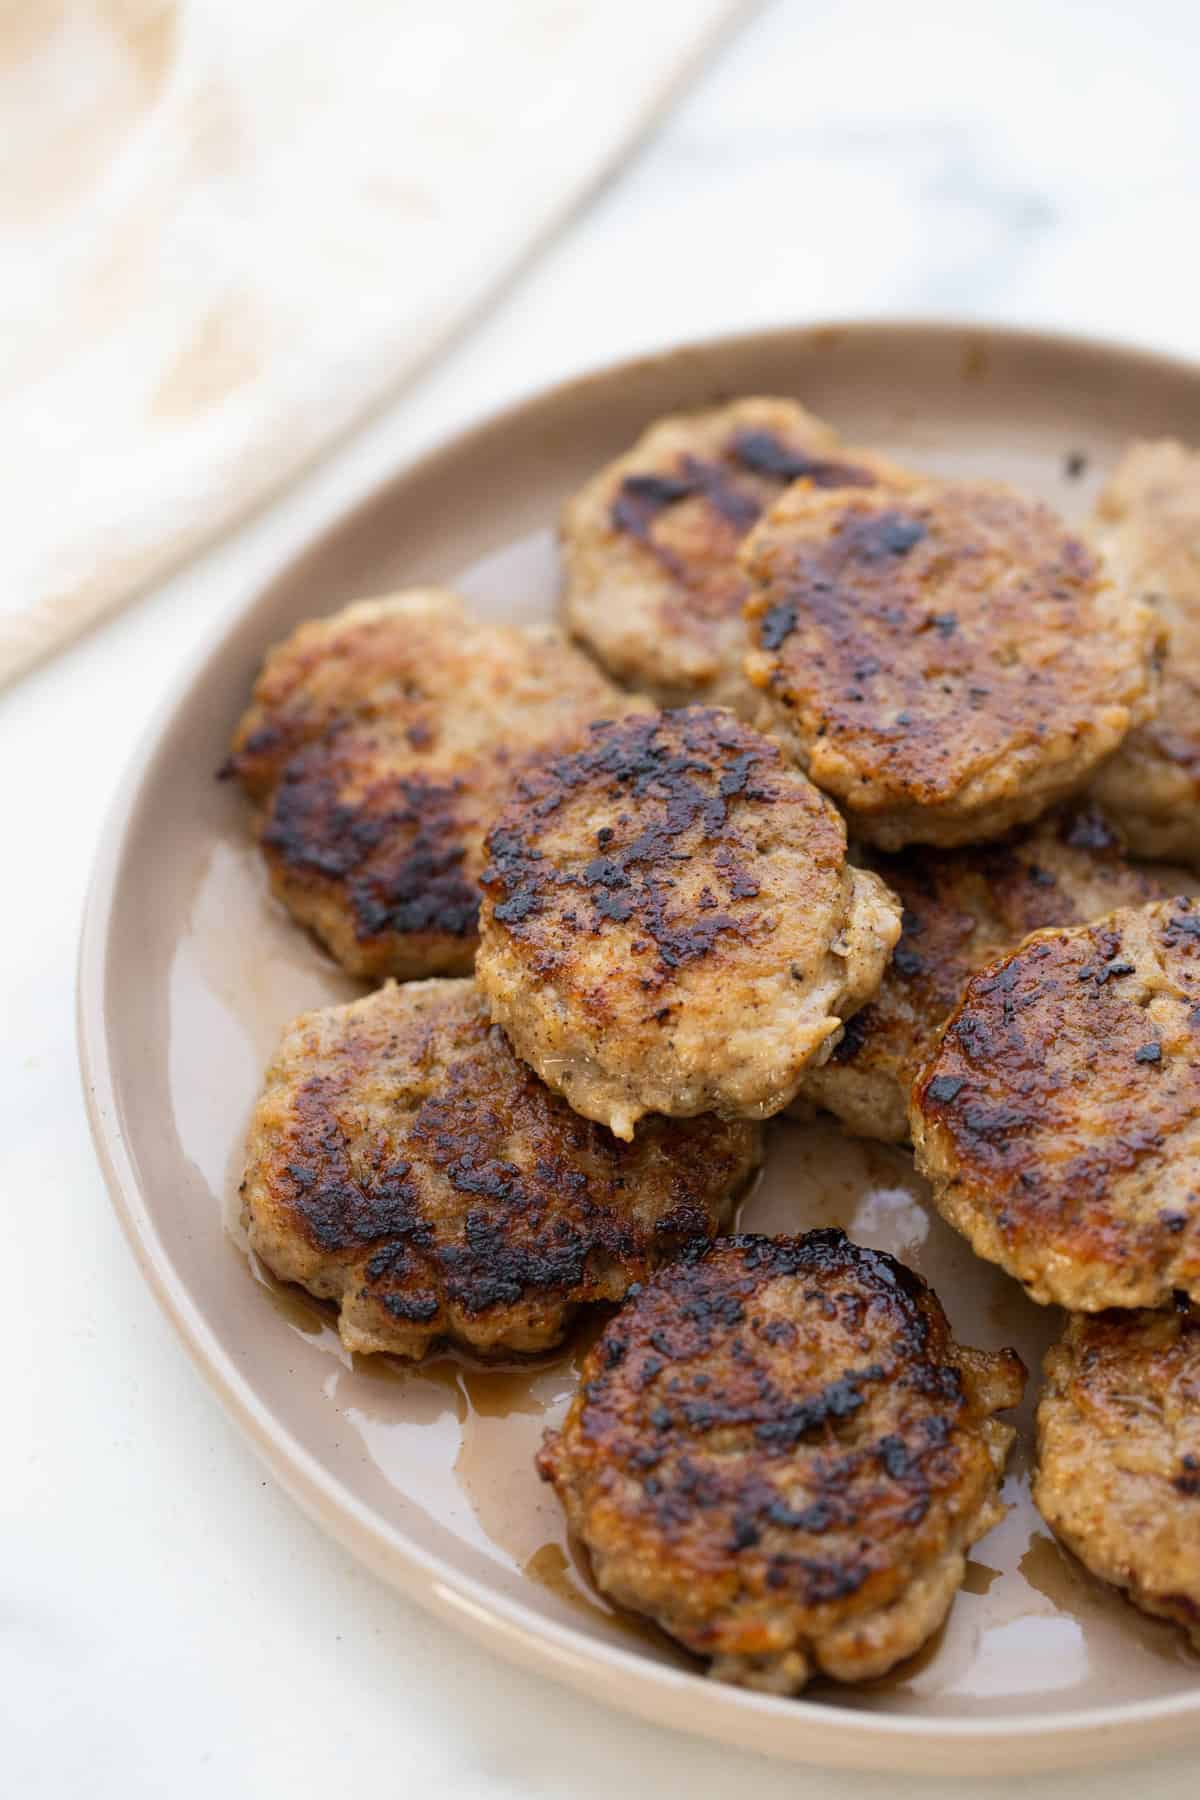 Plate of cooked chicken breakfast sausage patties.